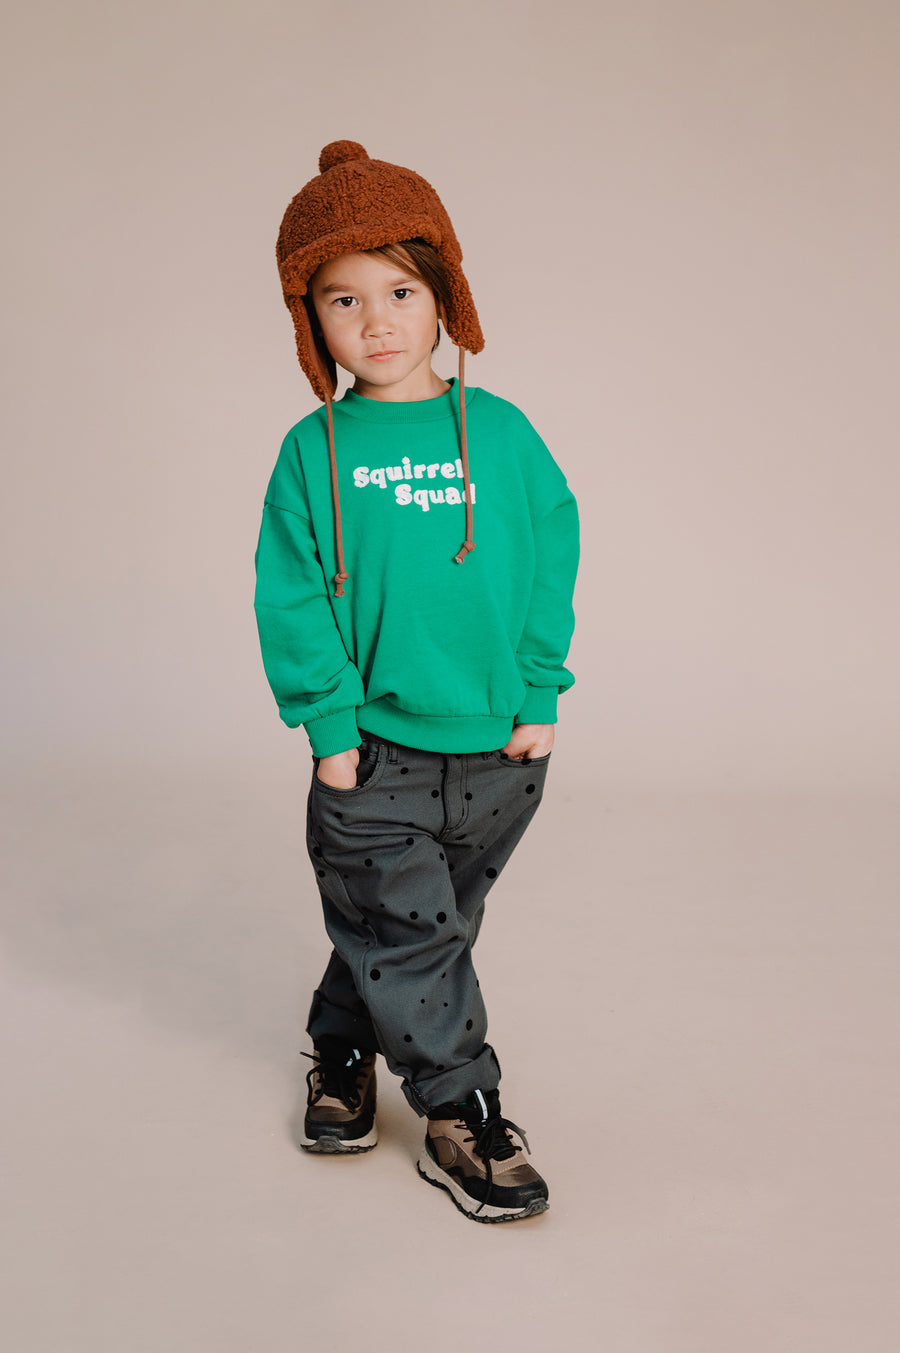 Squirrel squad green sweatshirt by Sproet & Sprout